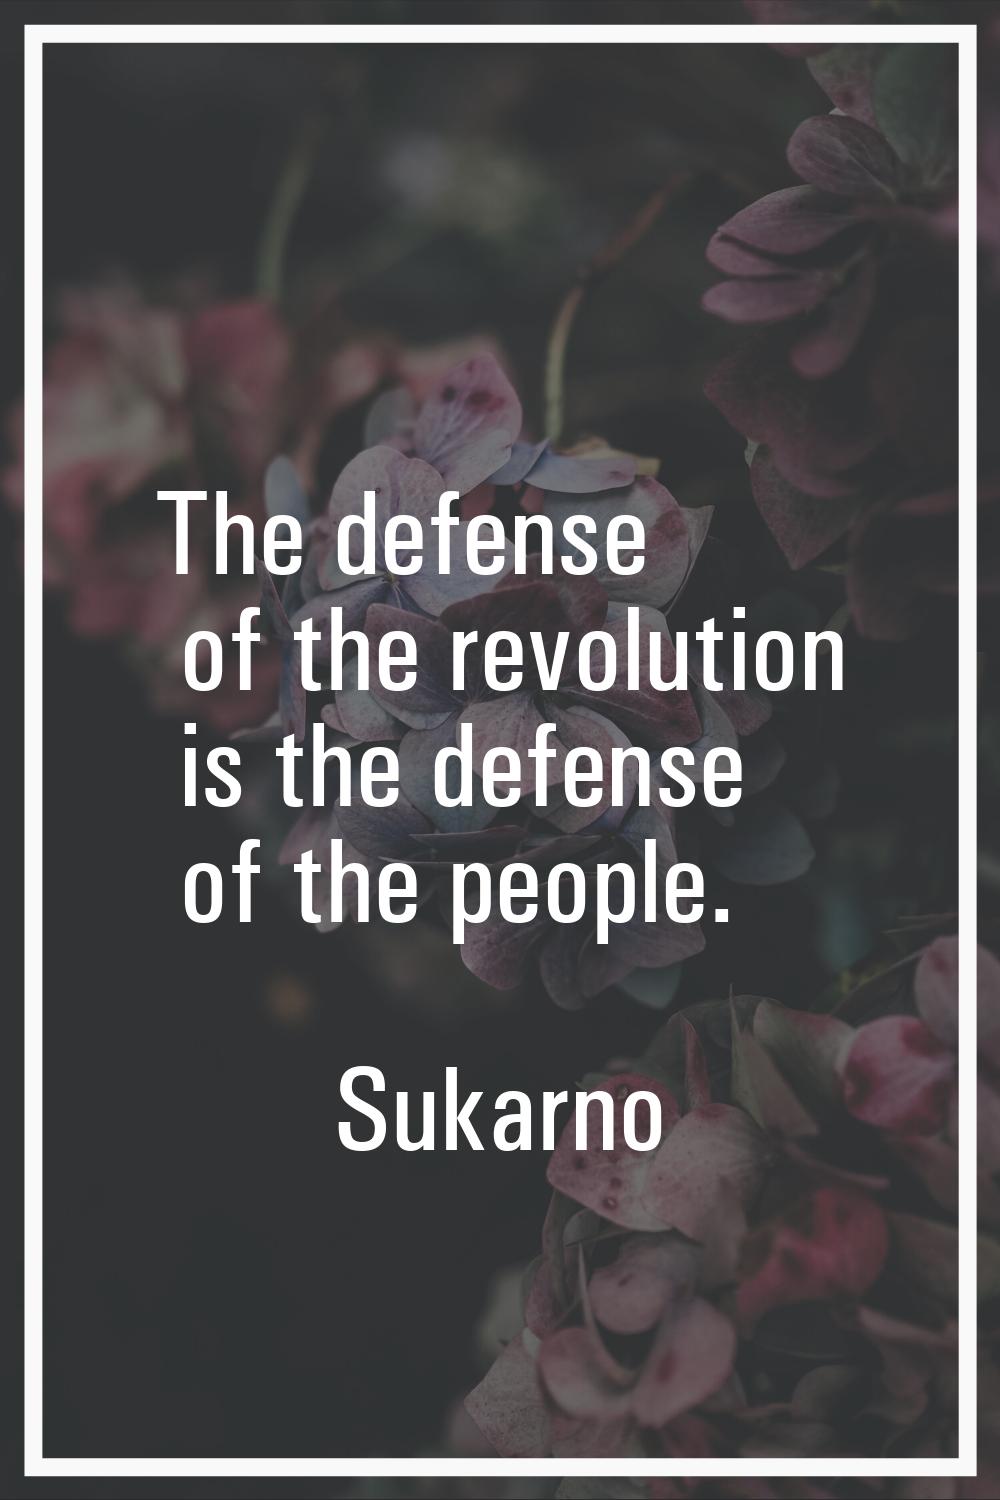 The defense of the revolution is the defense of the people.